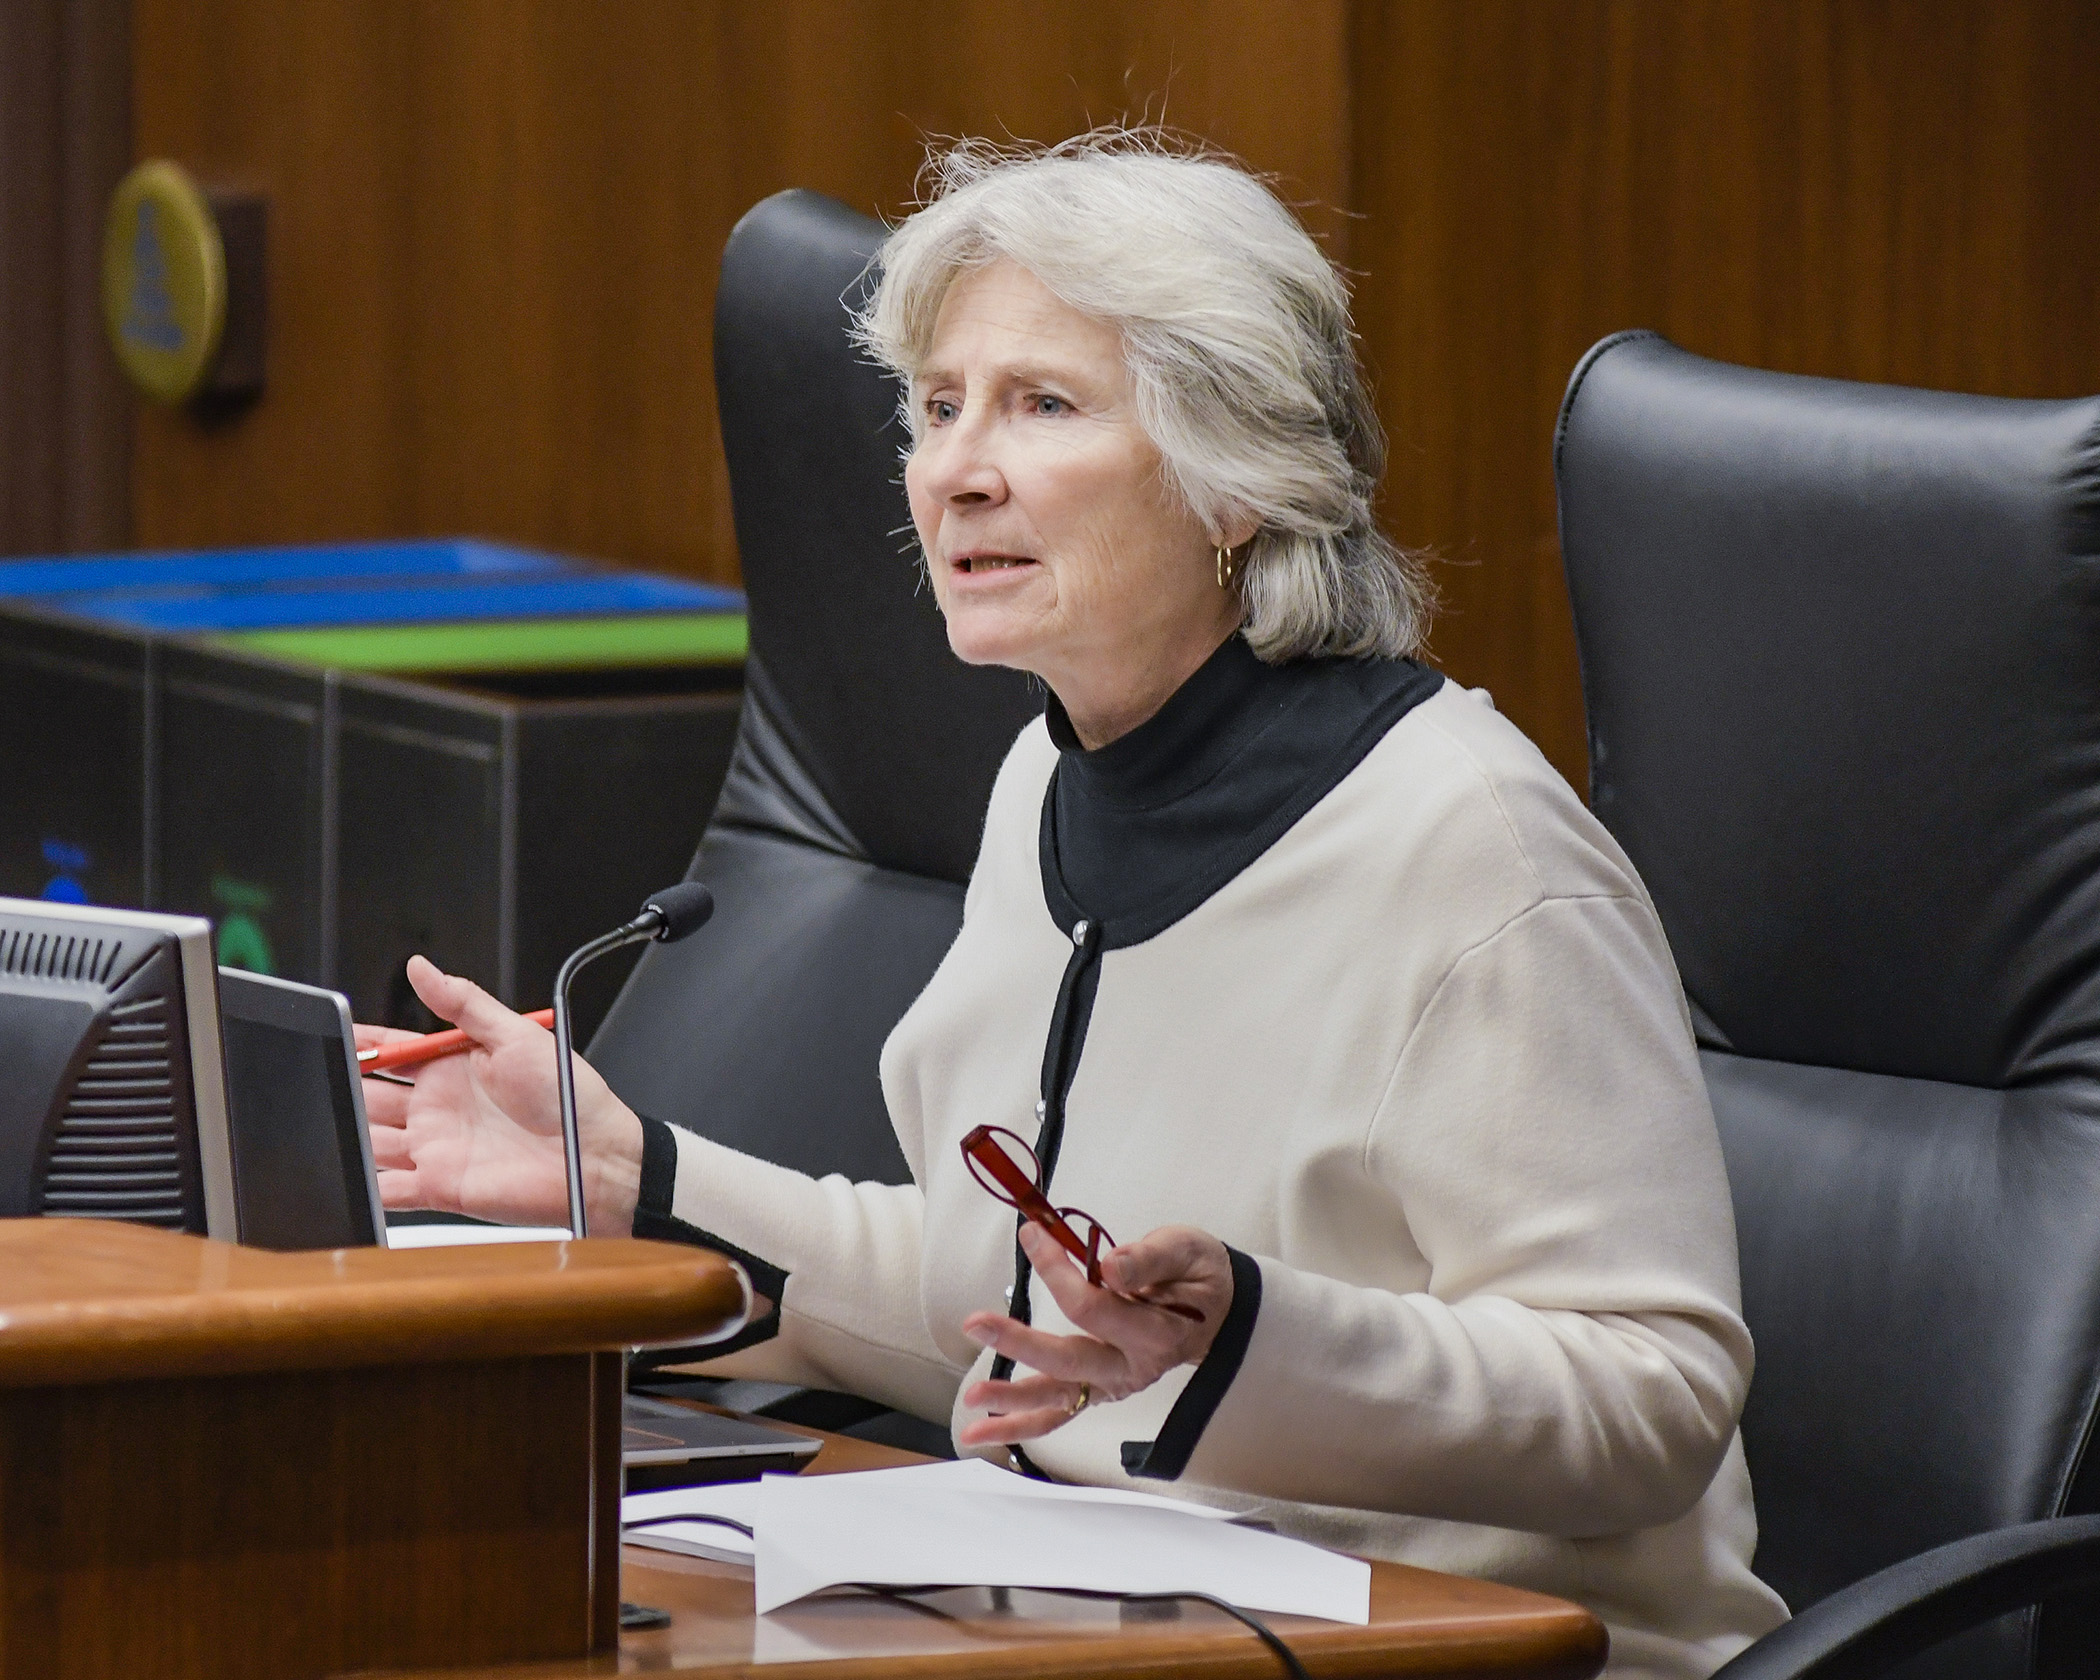 Health Commissioner Jan Malcolm presents an overview of the elder and vulnerable adult abuse prevention working groups to the House Long-Term Care Division Jan. 28. Photo by Andrew VonBank